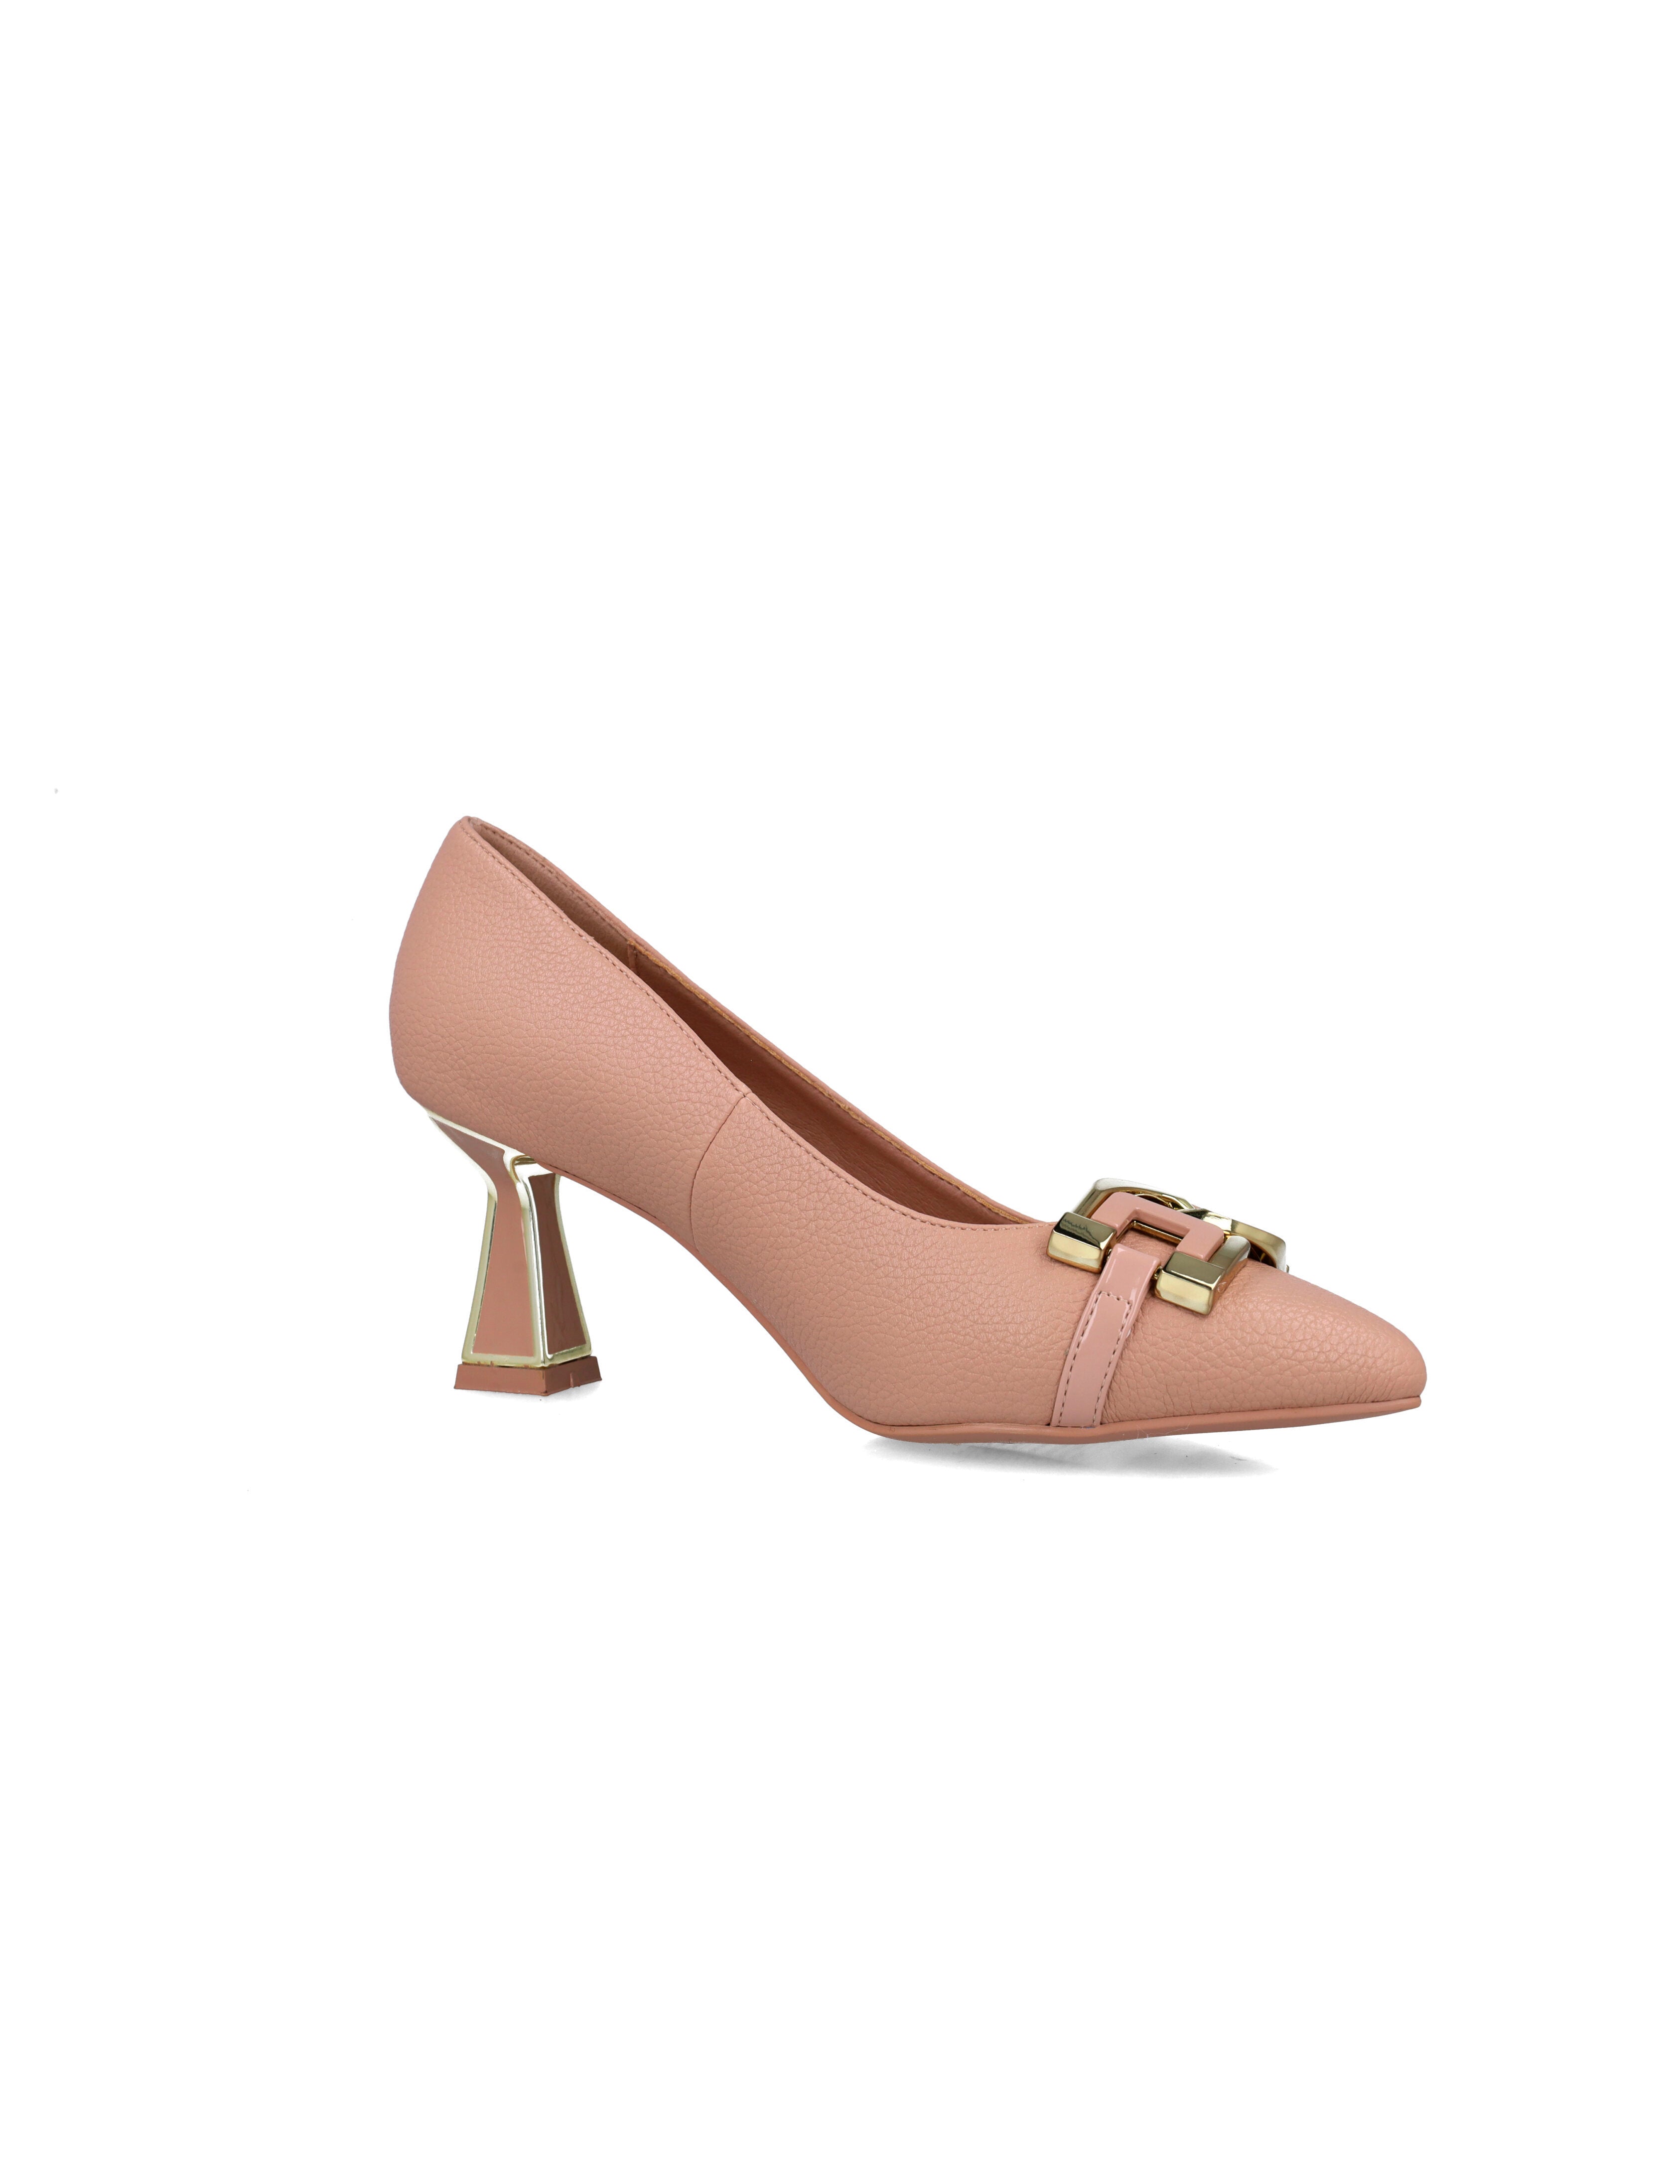 Pink Pumps With Gold Buckle And Embellished Heel_24936_97_02